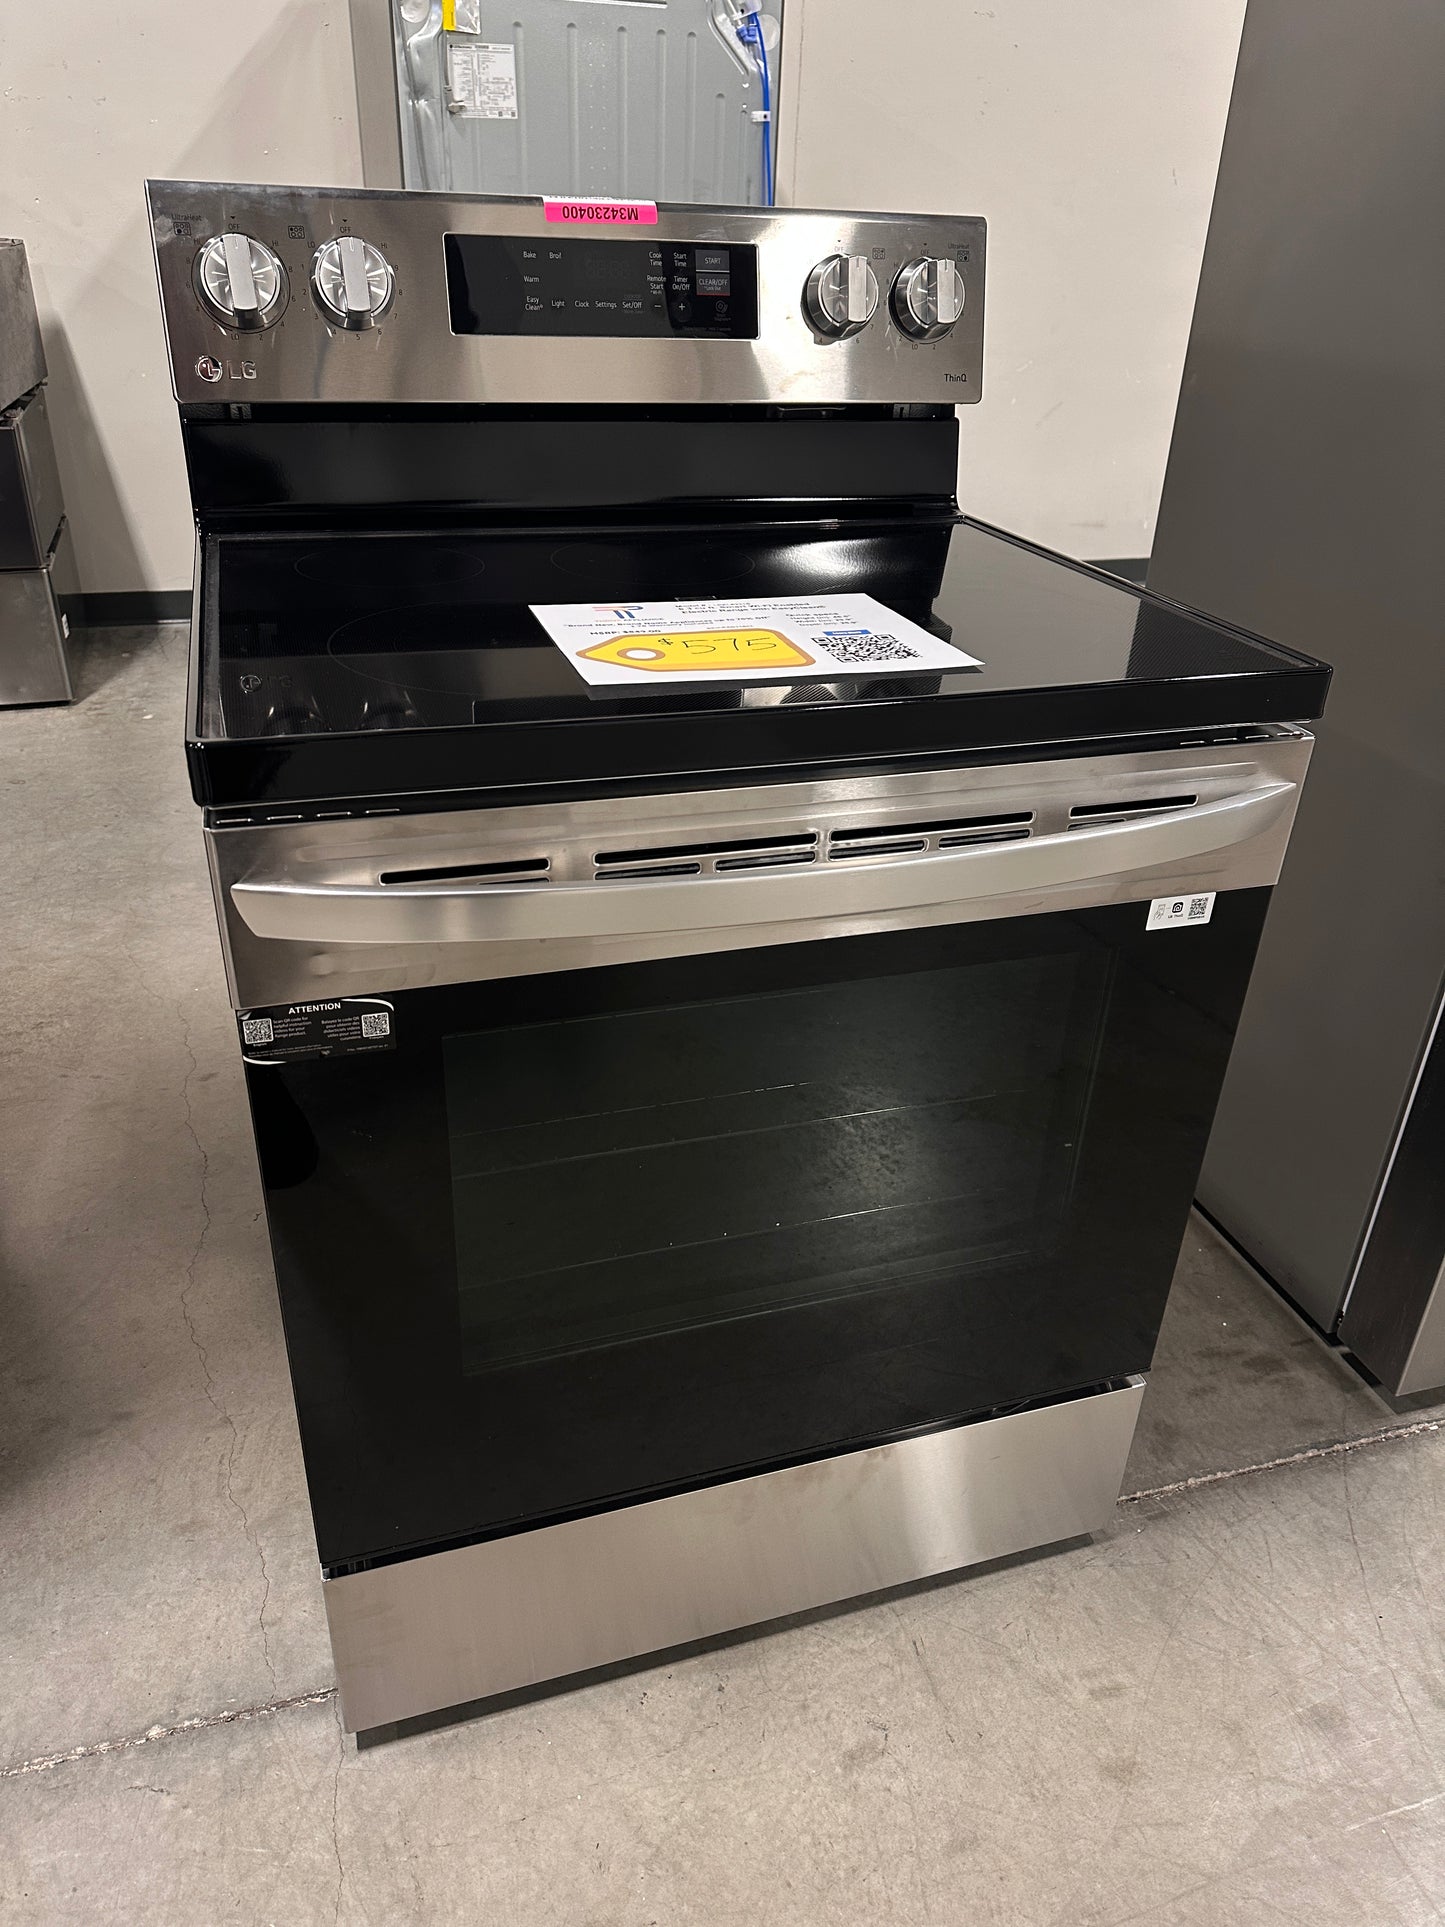 NEW ELECTRIC LG RANGE with EASY CLEAN MODEL:LREL6321S  RAG11861